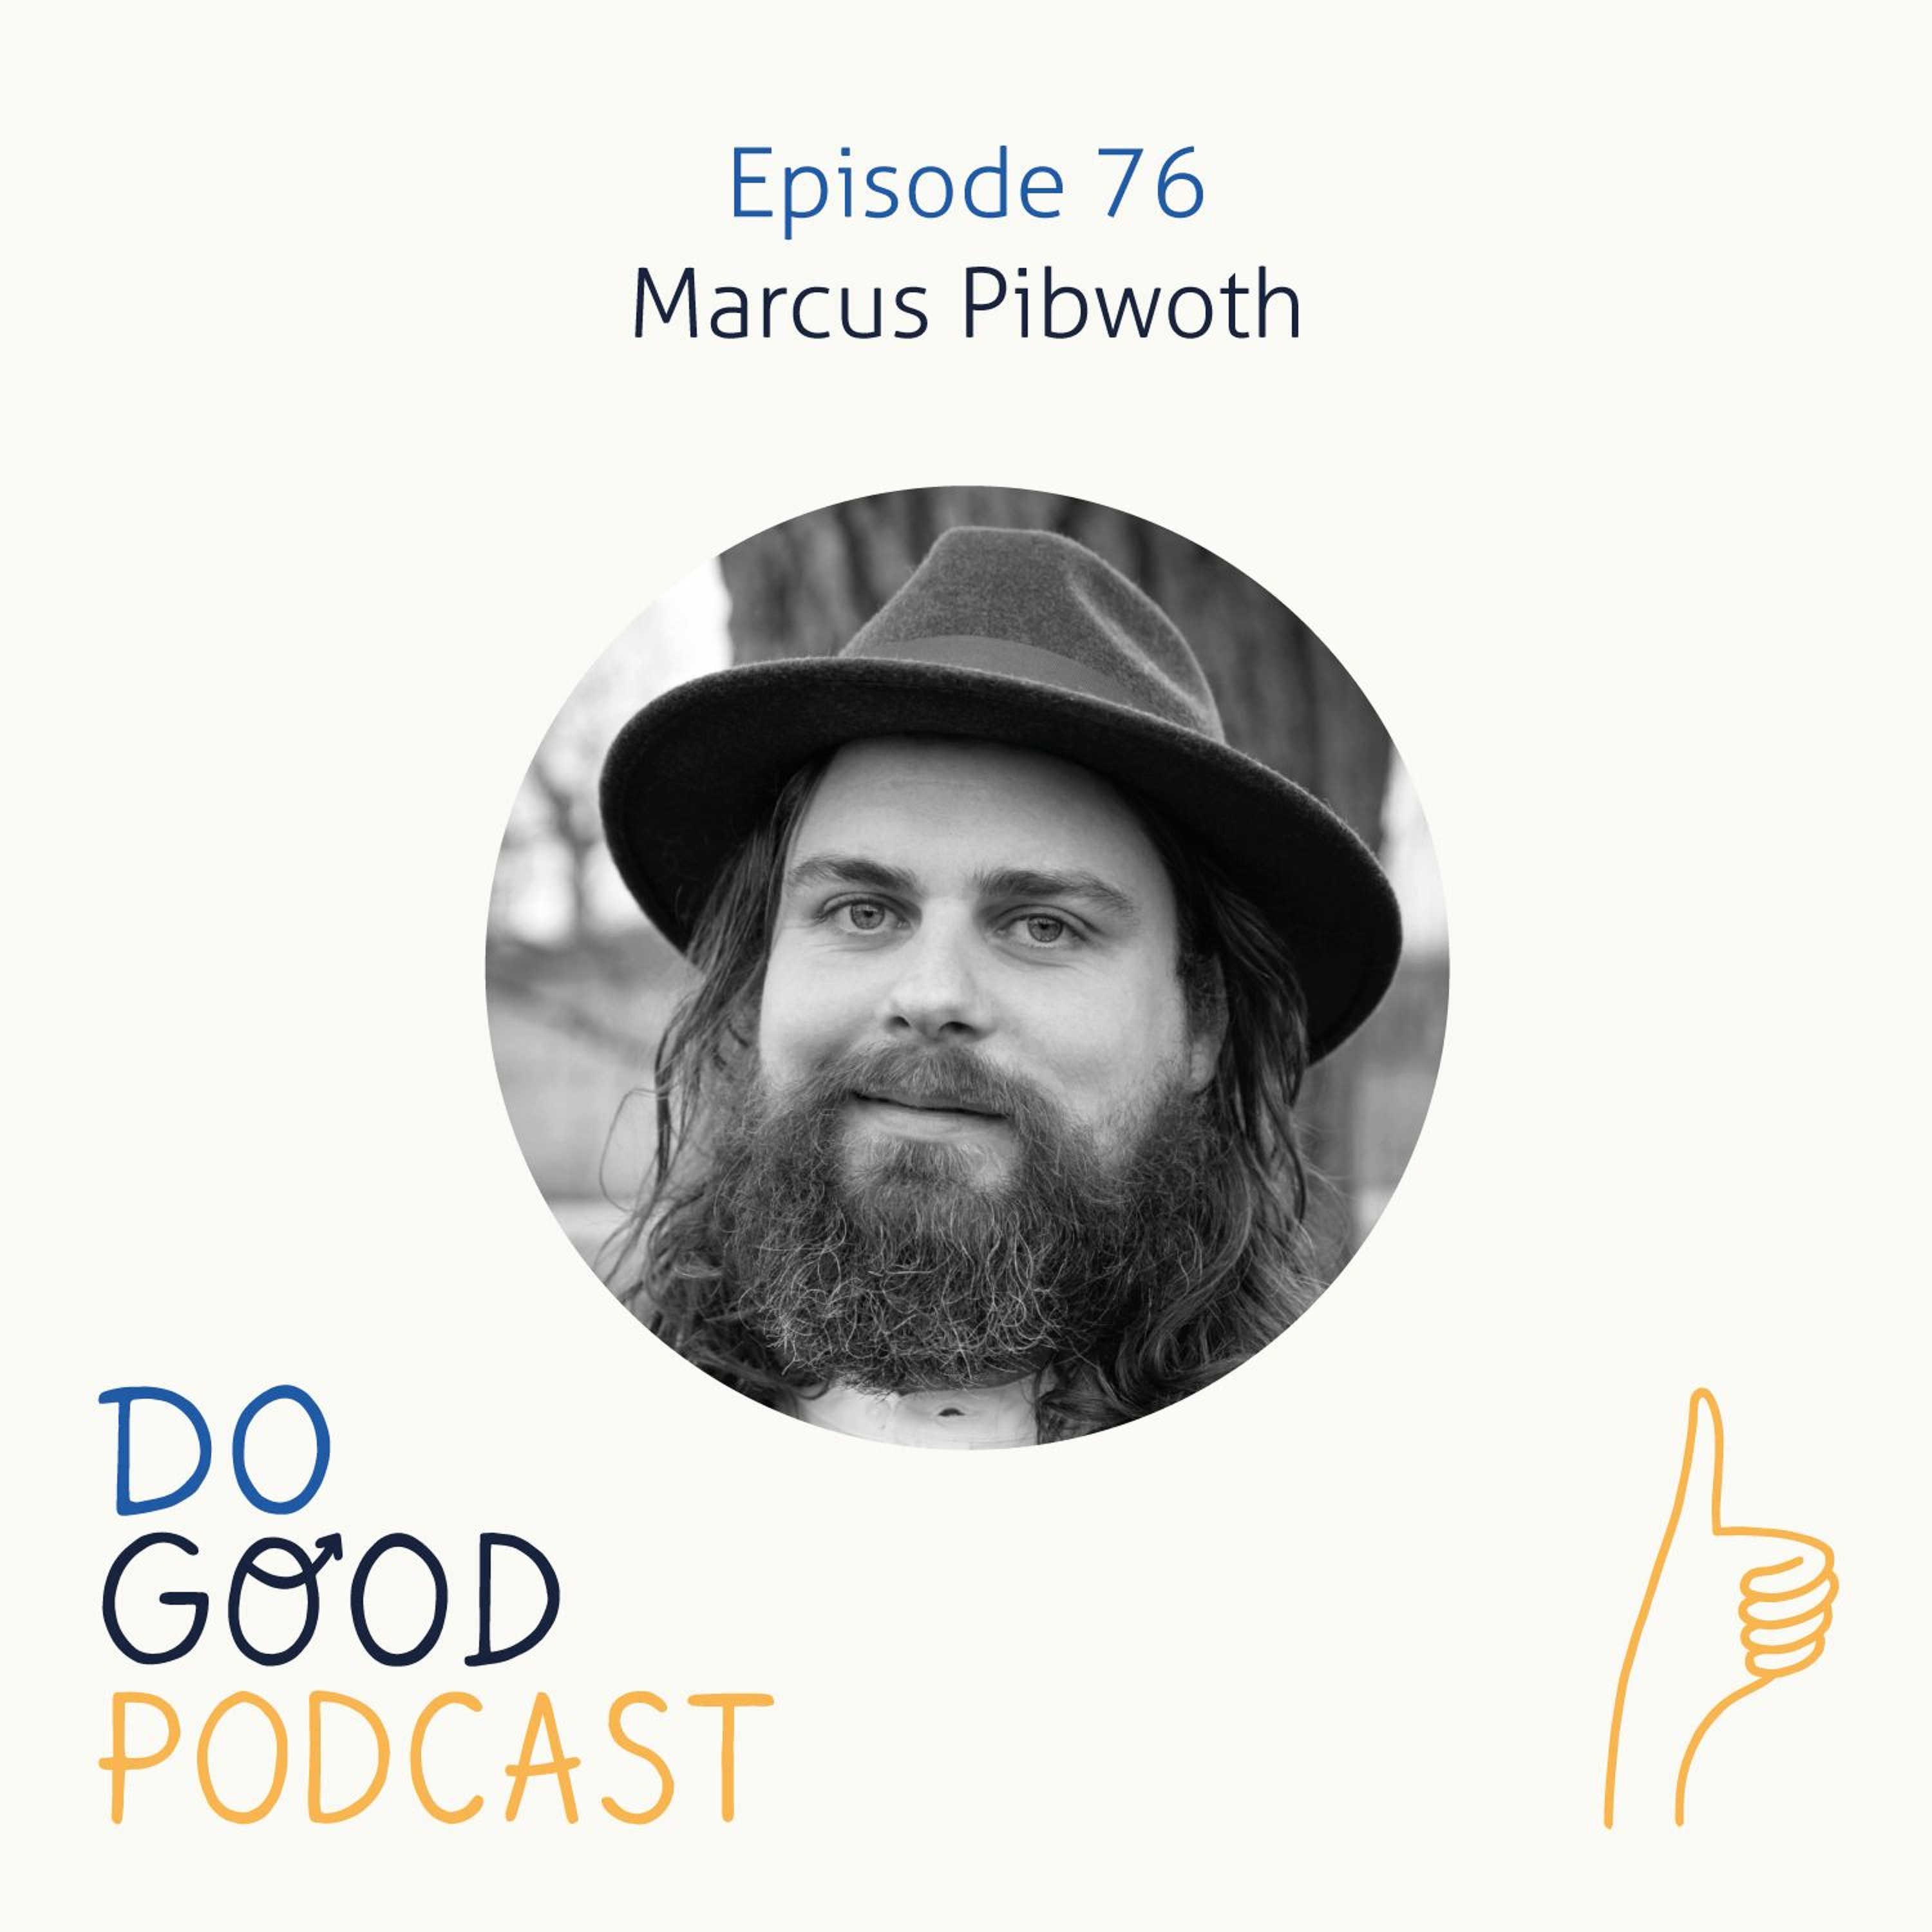 Ep 76: Marcus Pibworth on navigating the difficult bits of life and what it really means to be human